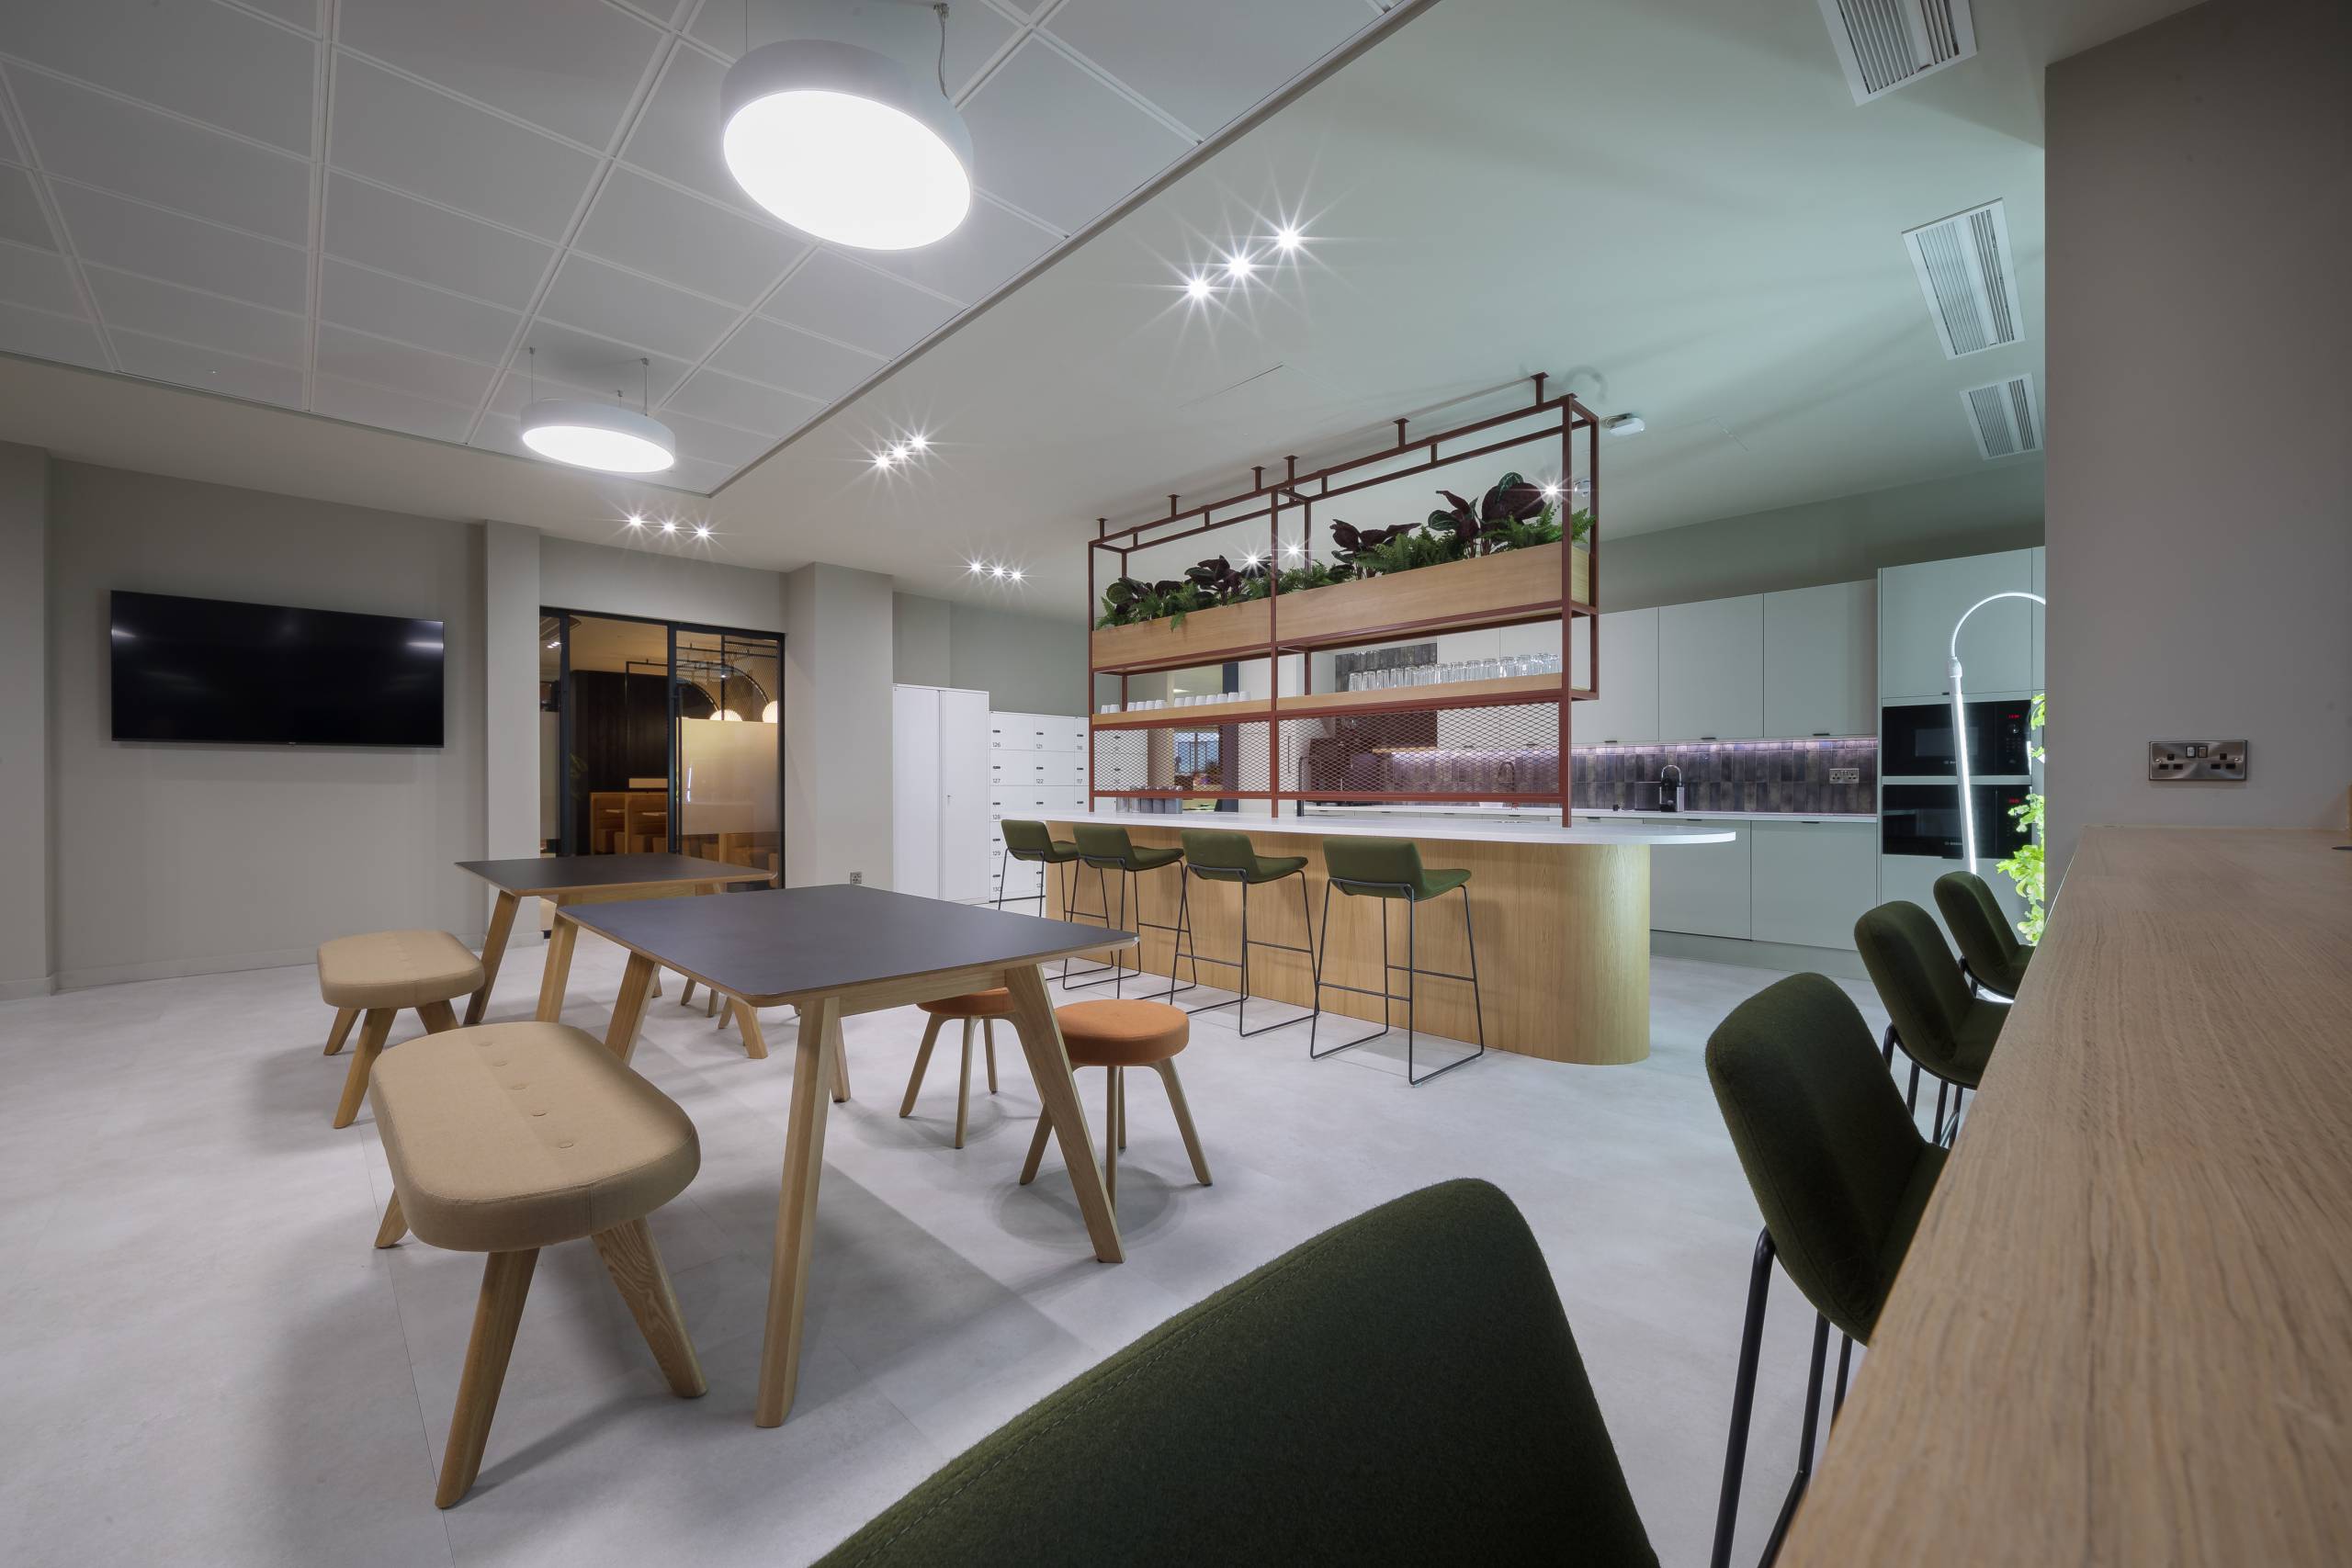 social canteen area in an office featuring furniture by flokk brand connection